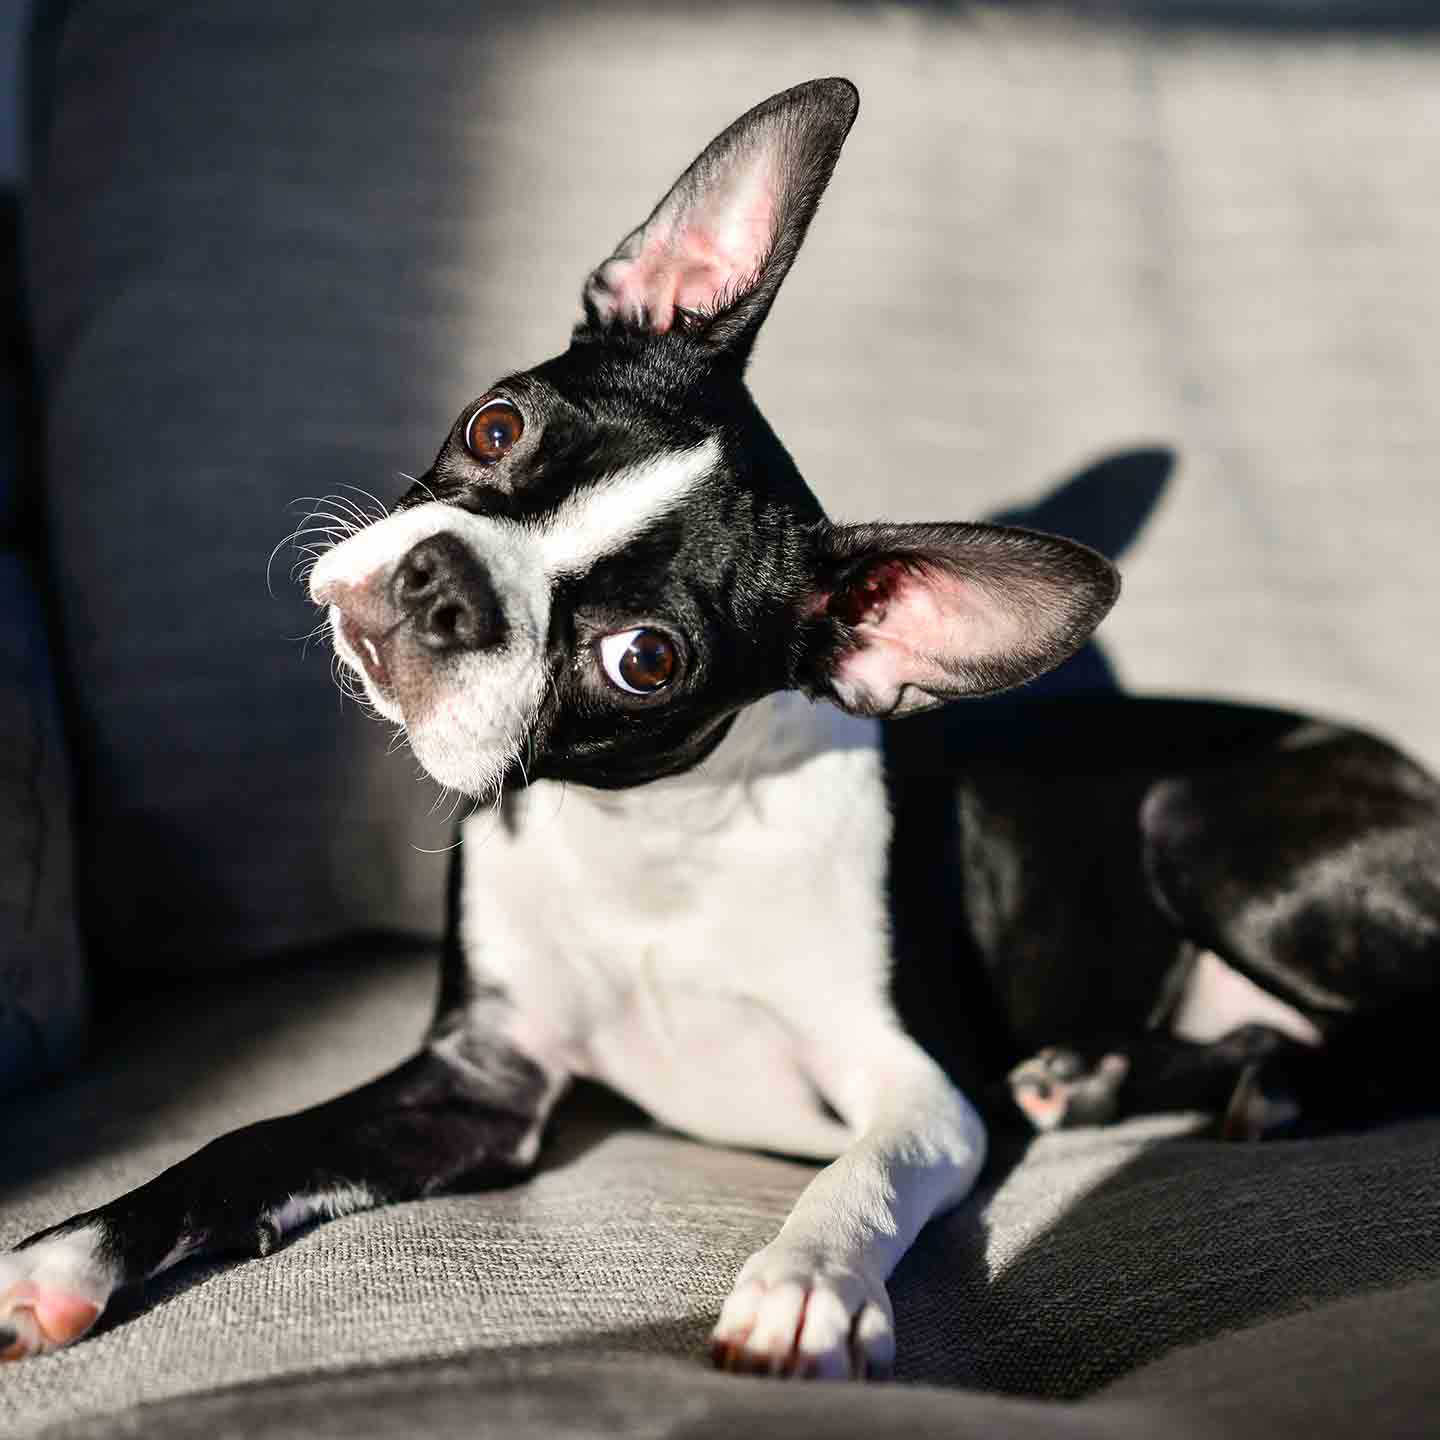 Boston Terrier sitting and tilting their head